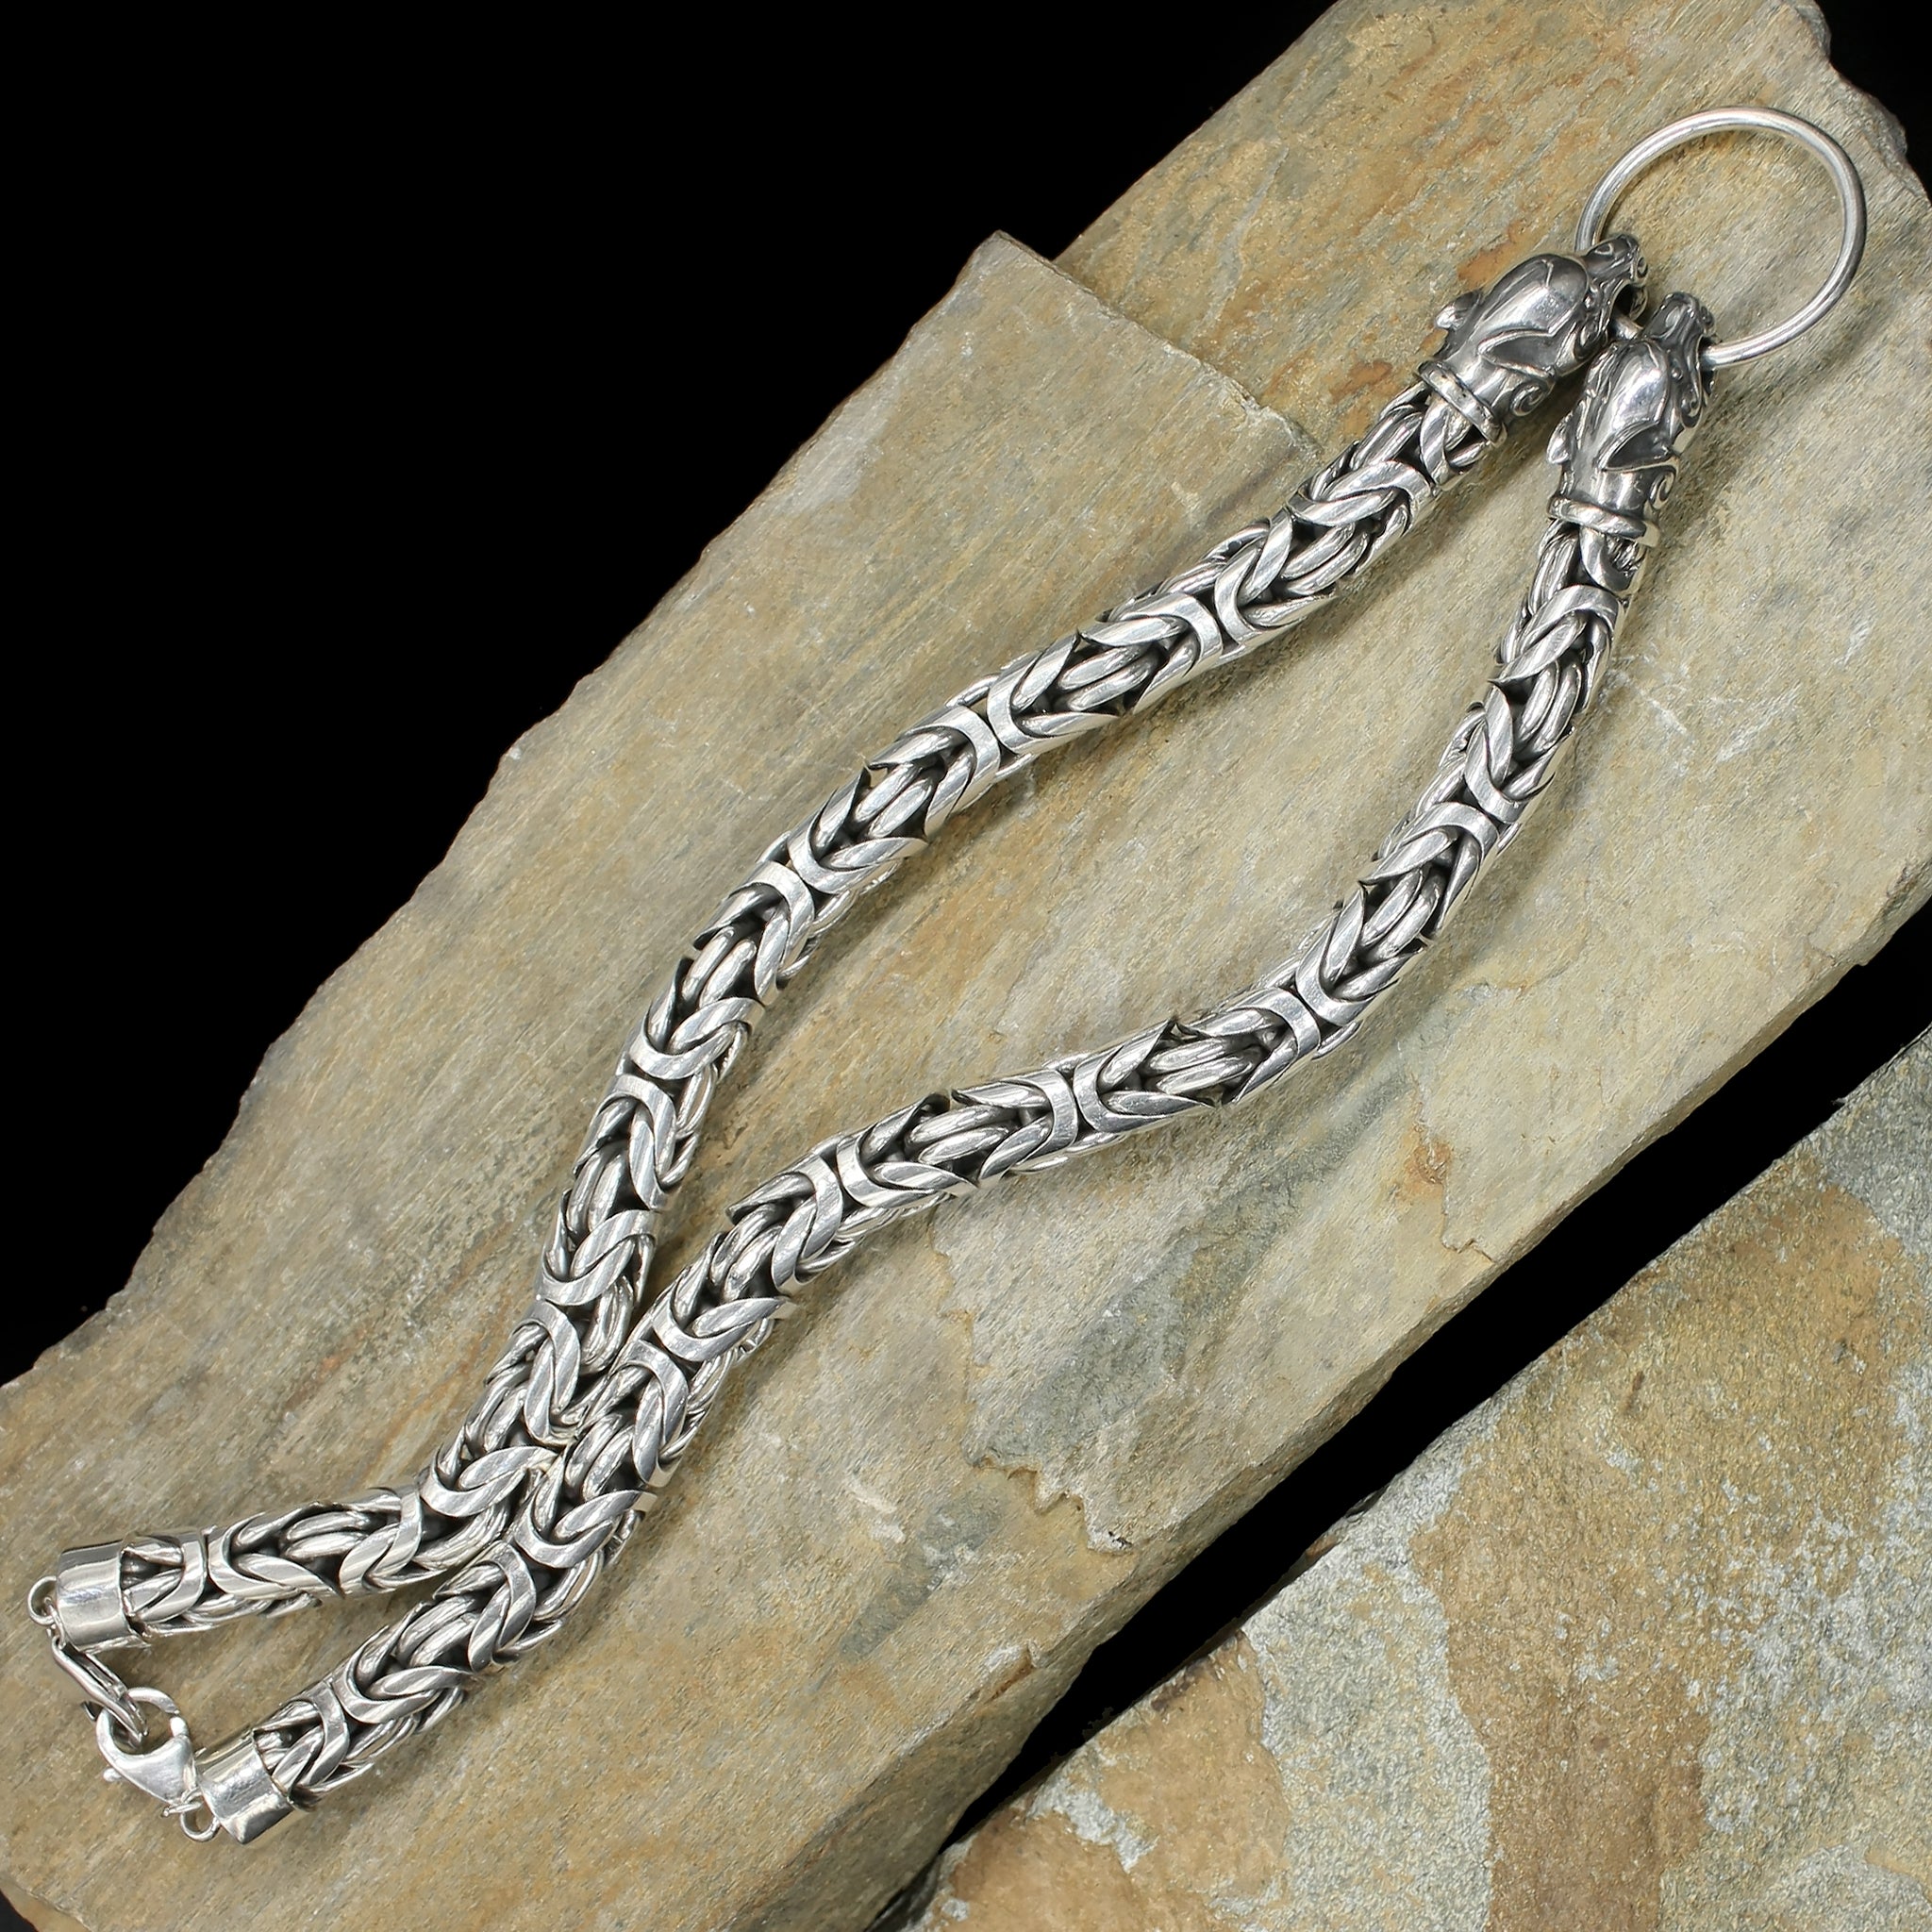 10mm Silver Double King Chain Necklace with Ferocious Wolf Heads on Rock